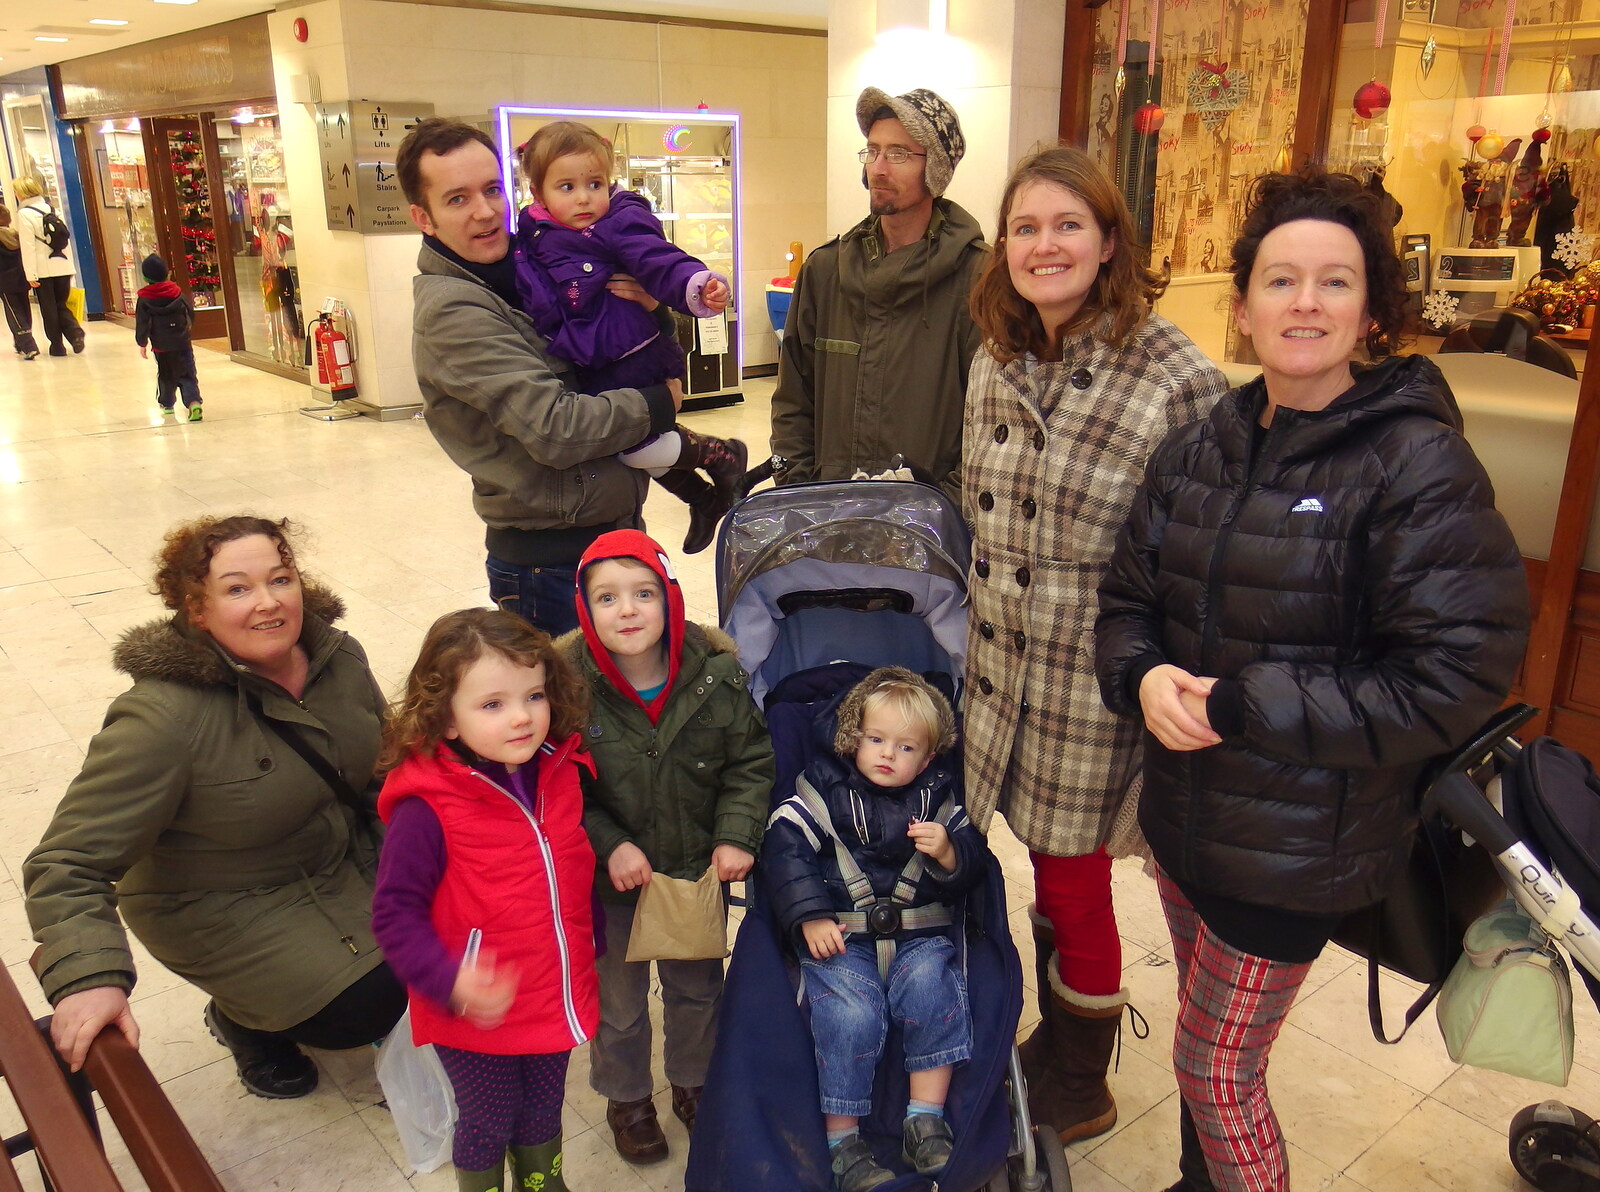 A group photo in the mall from Dun Laoghaire and an Electrical Disaster, Monkstown, County Dublin, Ireland - 4th January 2014